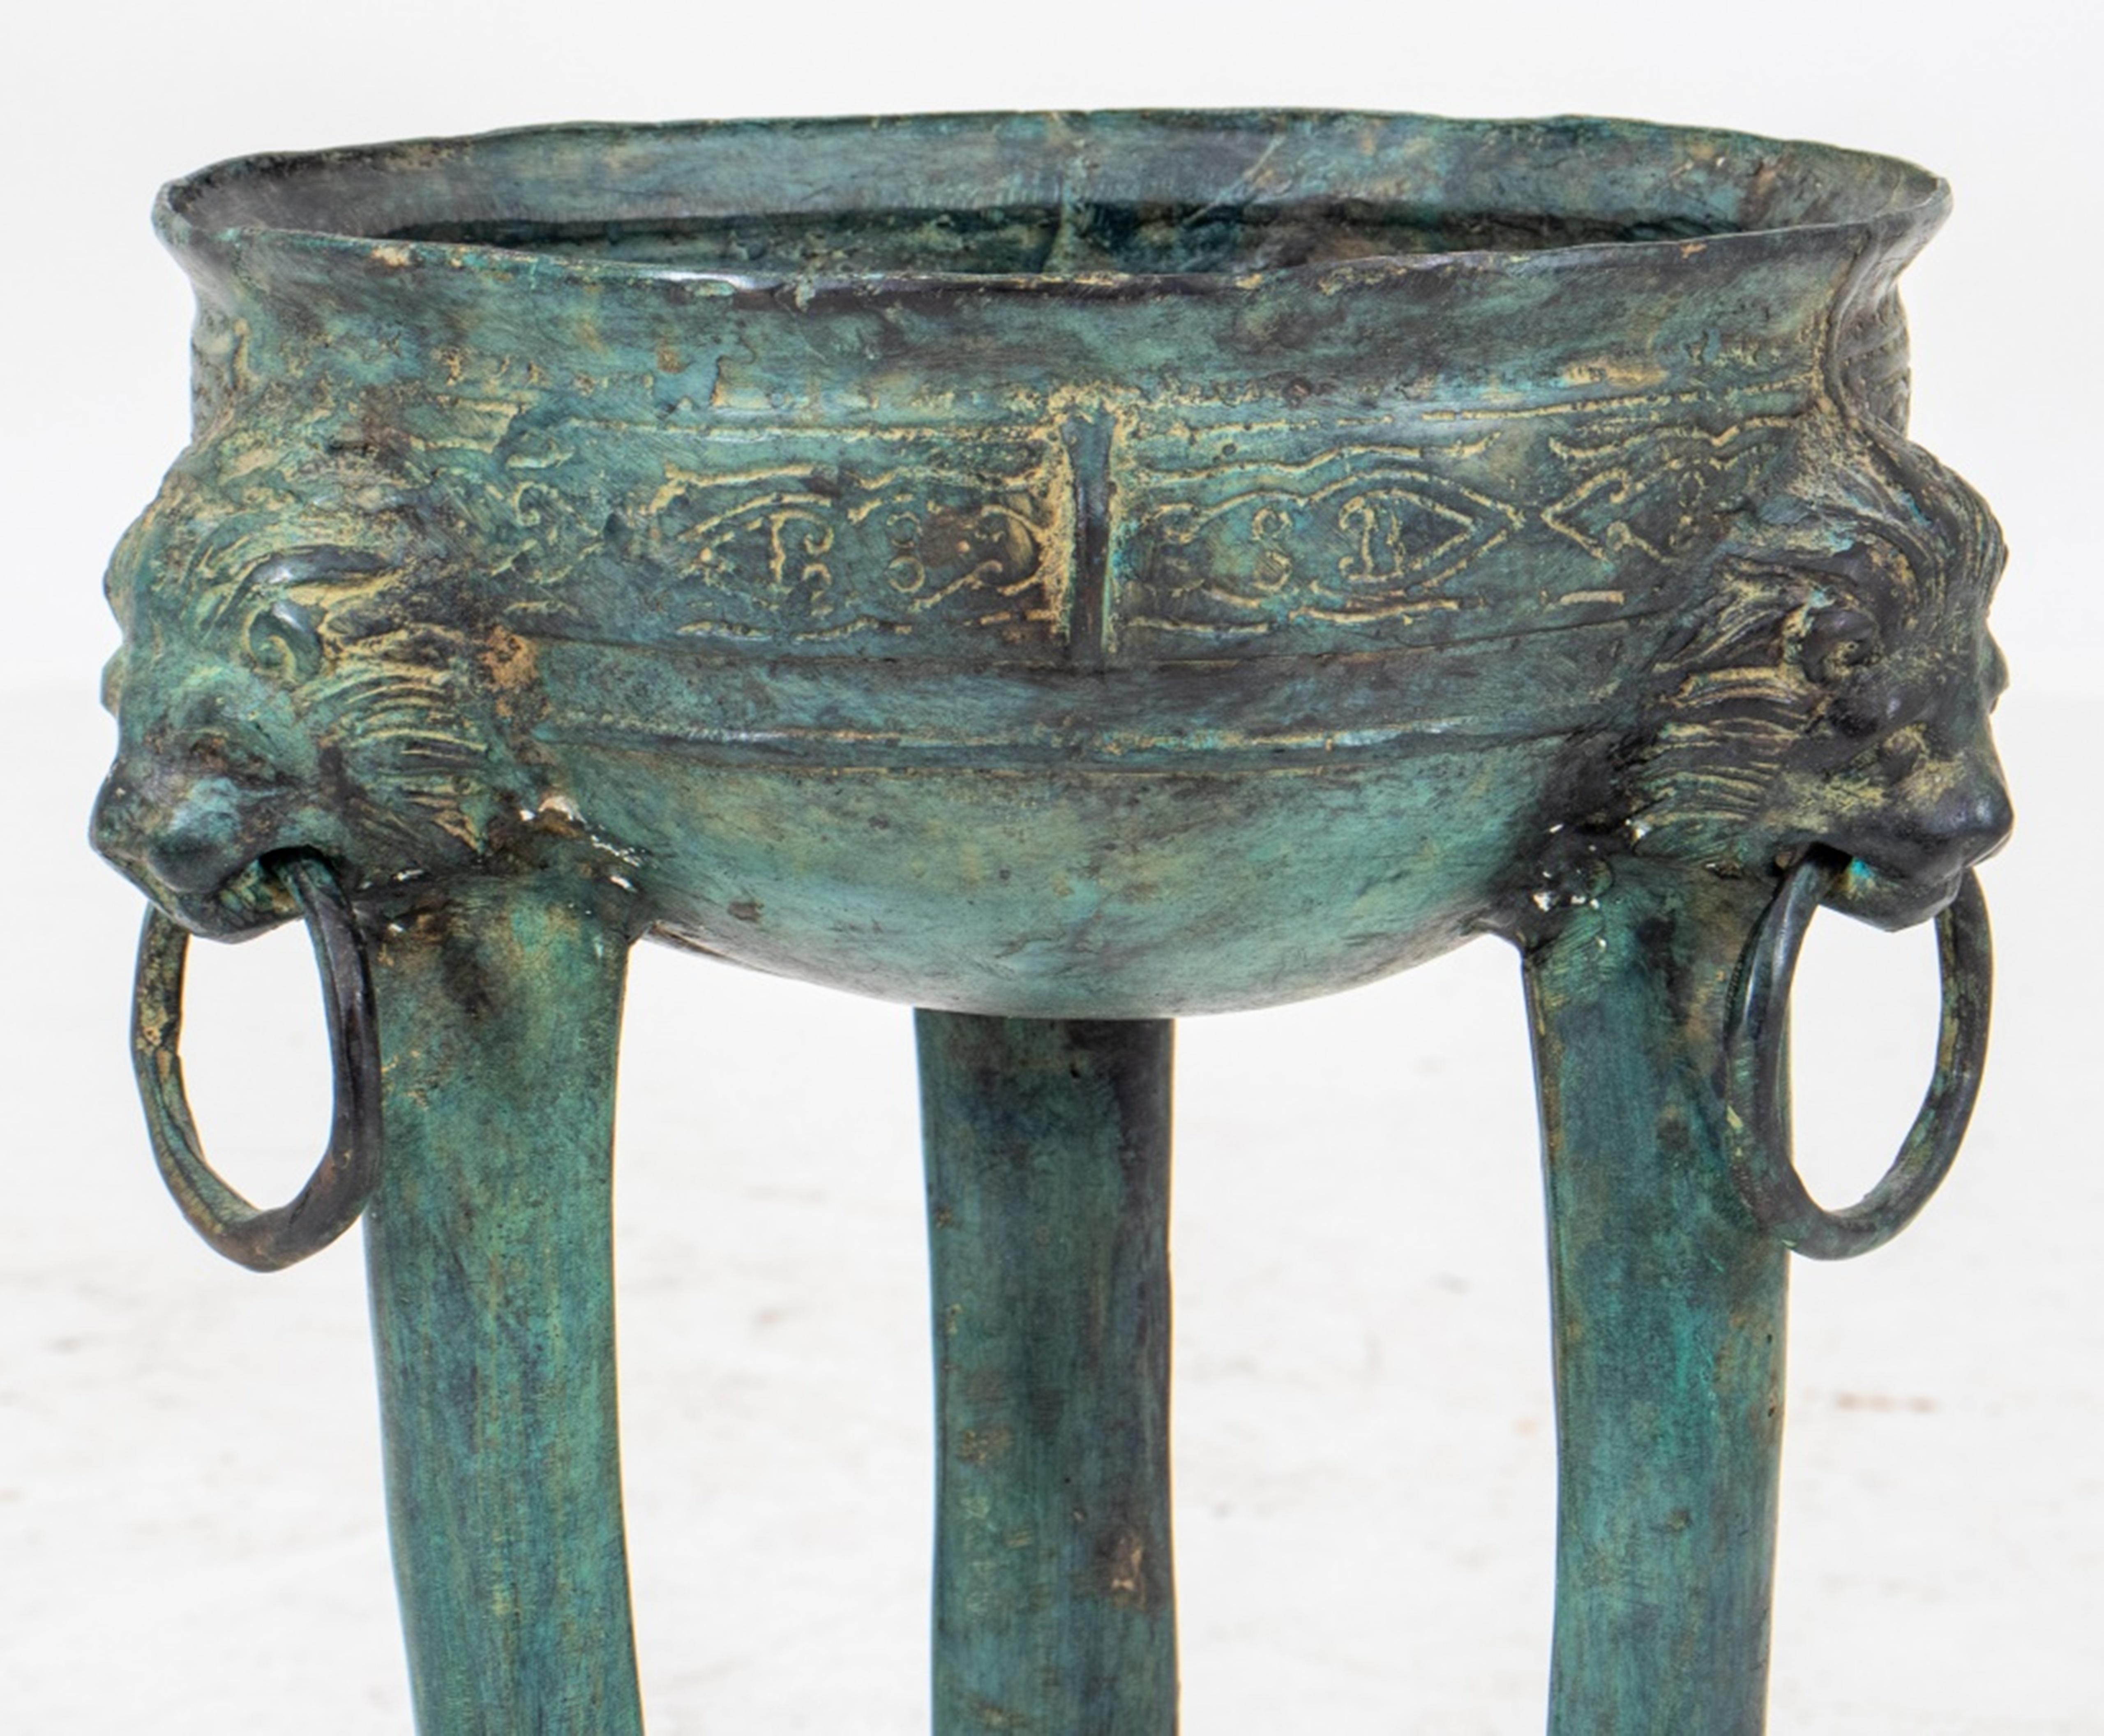 Archeological style verdigris bronze stand, in the manner of Pompeiian work, and in the form of an incense brazier, the round vessel supported by three lion headed lion legs.
Dimensions: 23